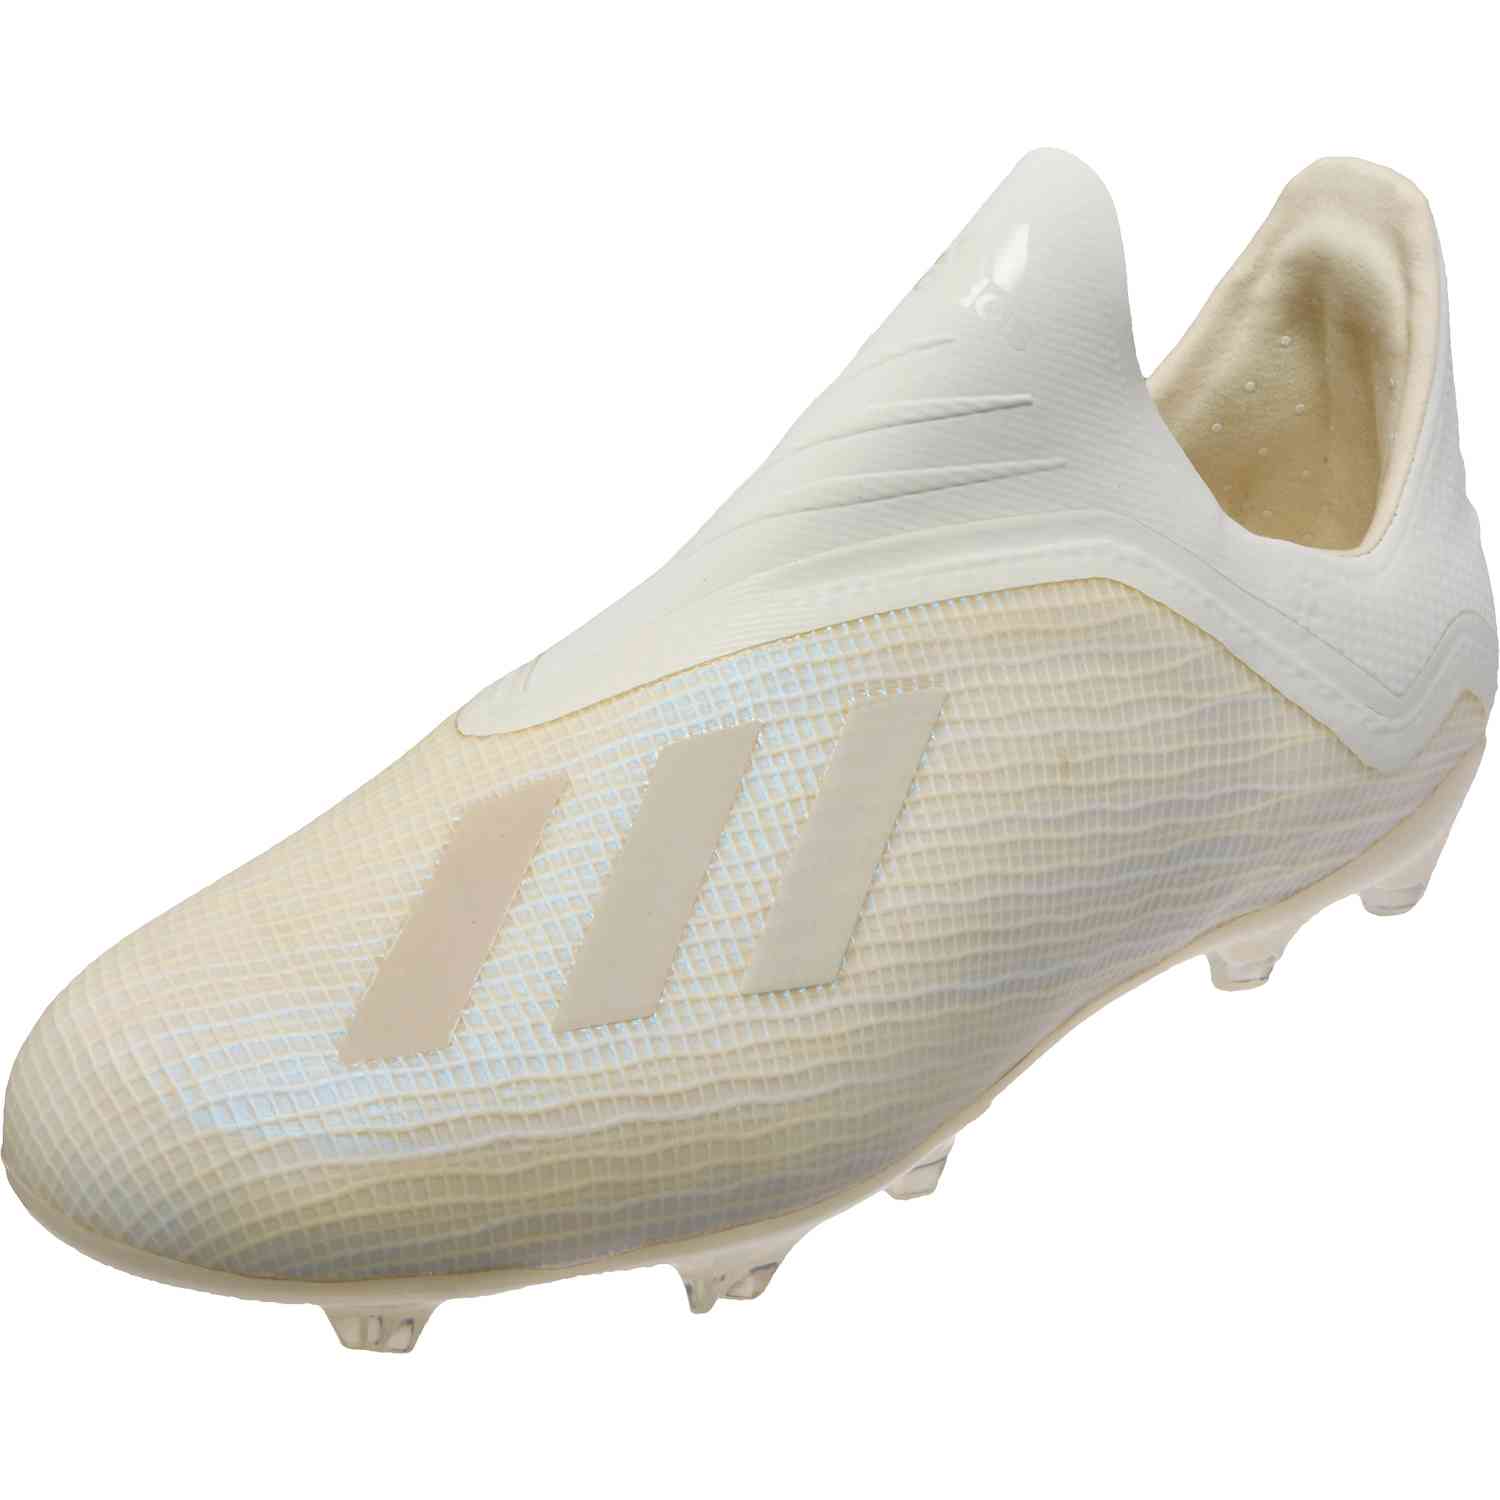 adidas x youth soccer cleats